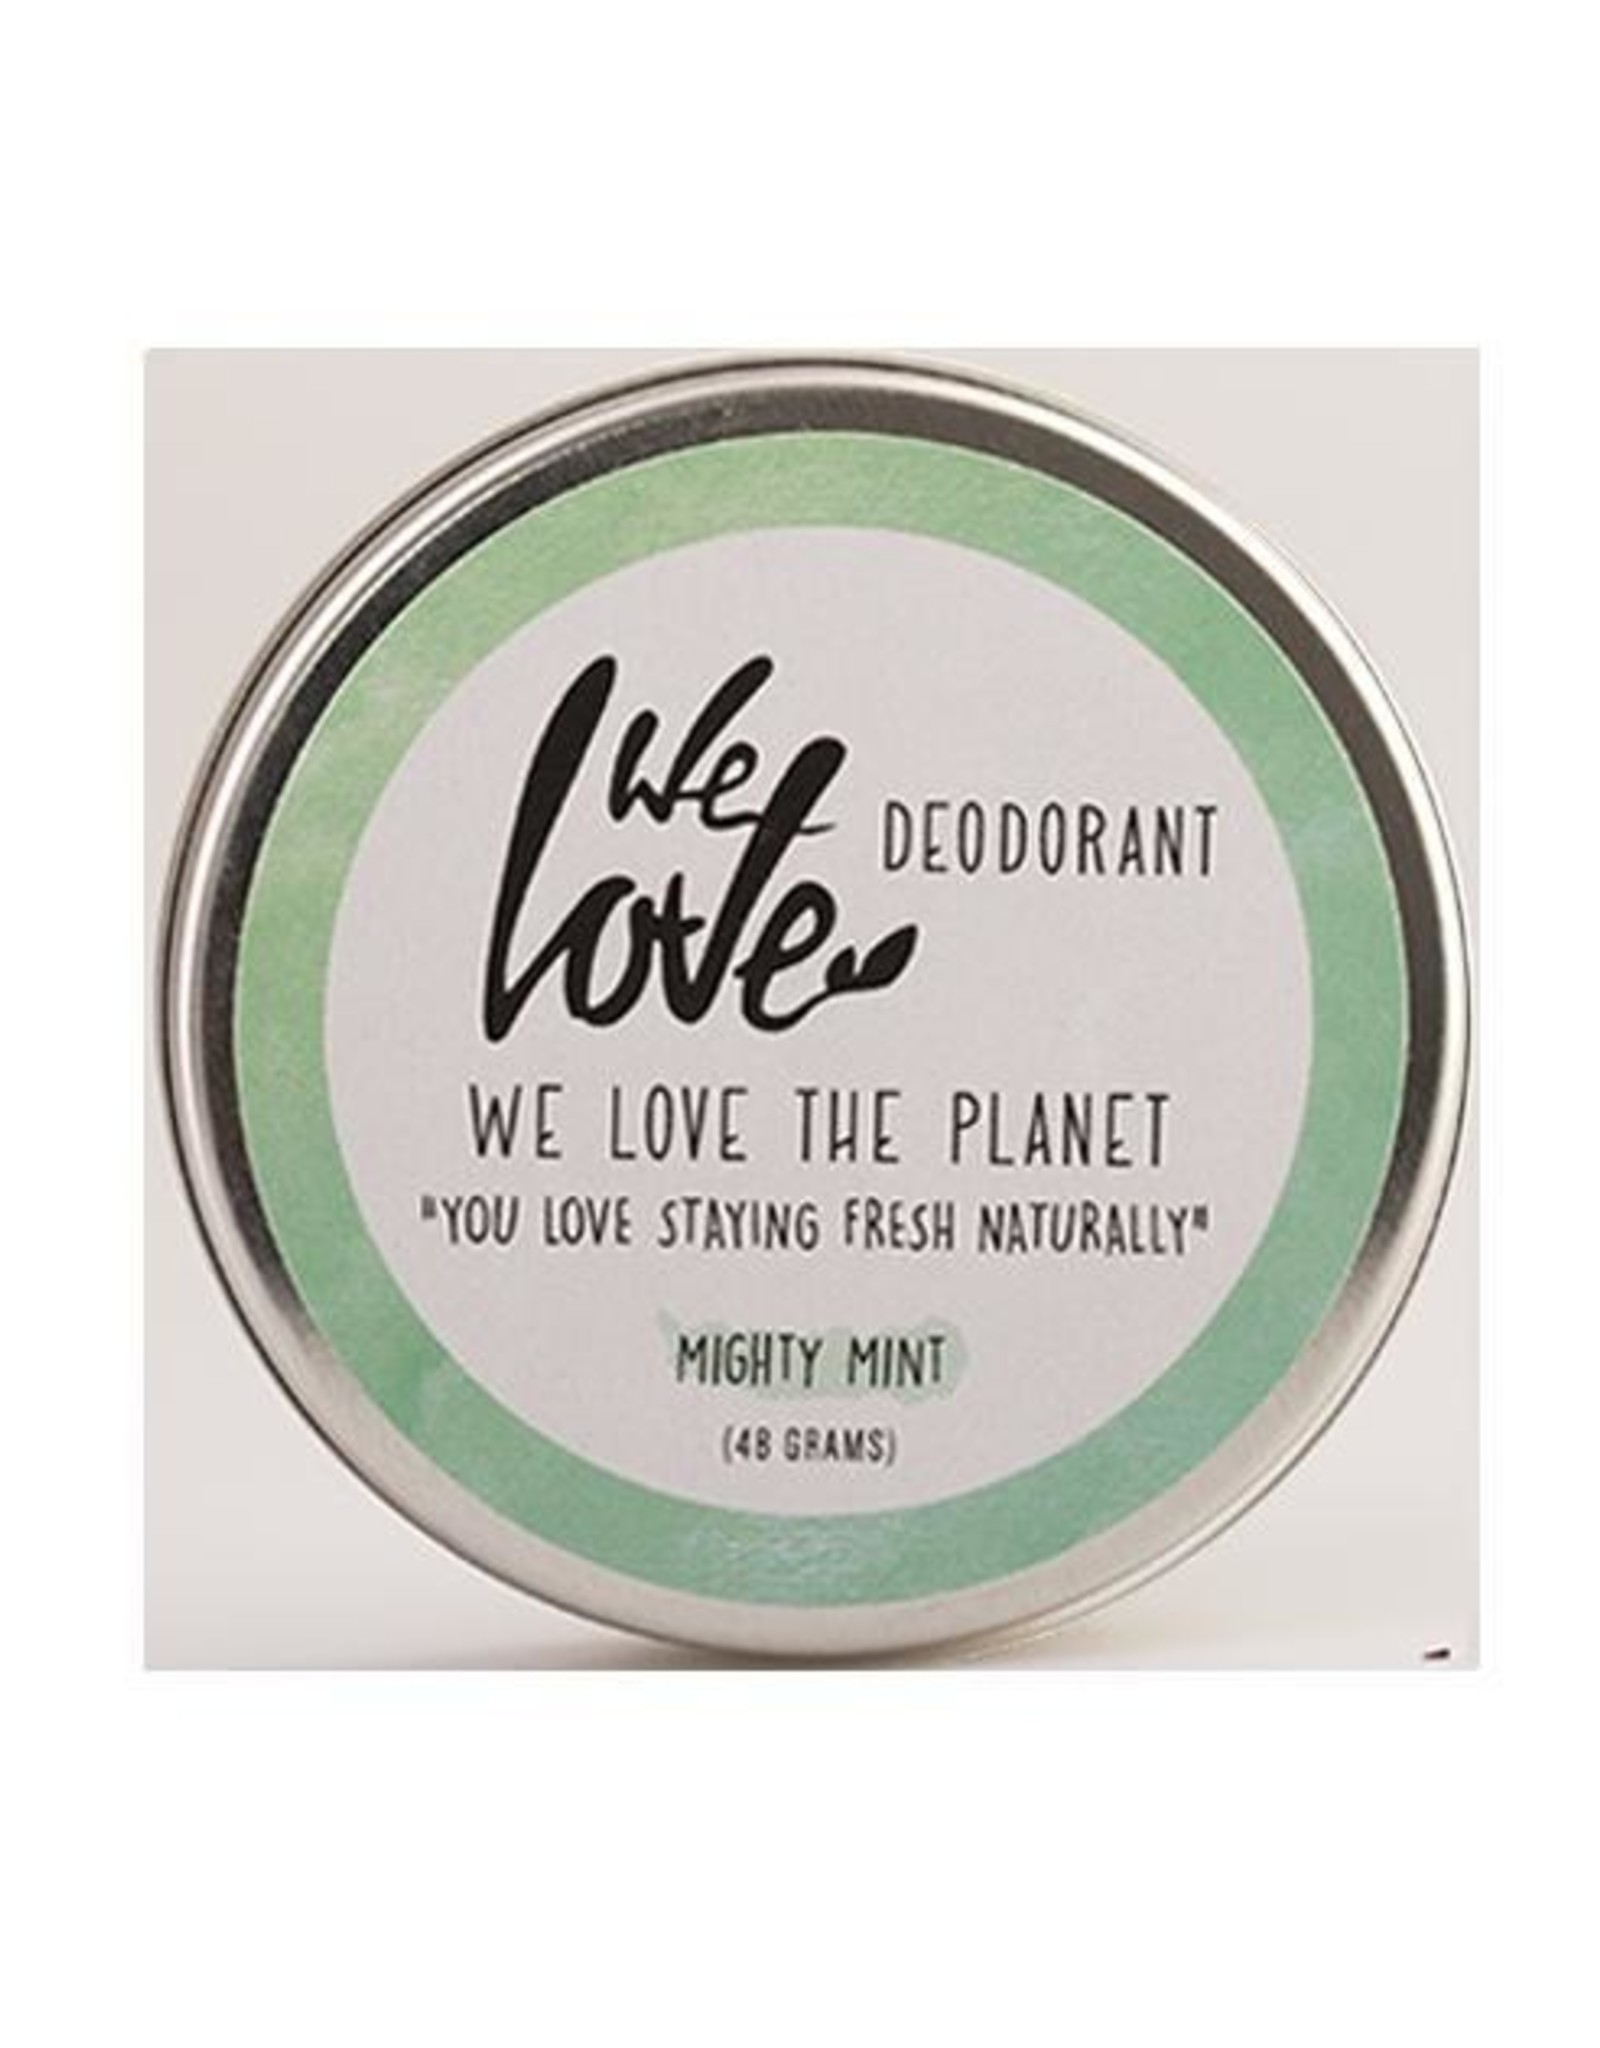 We love the planet The planet 100% natural deodorant mighty mint 48g